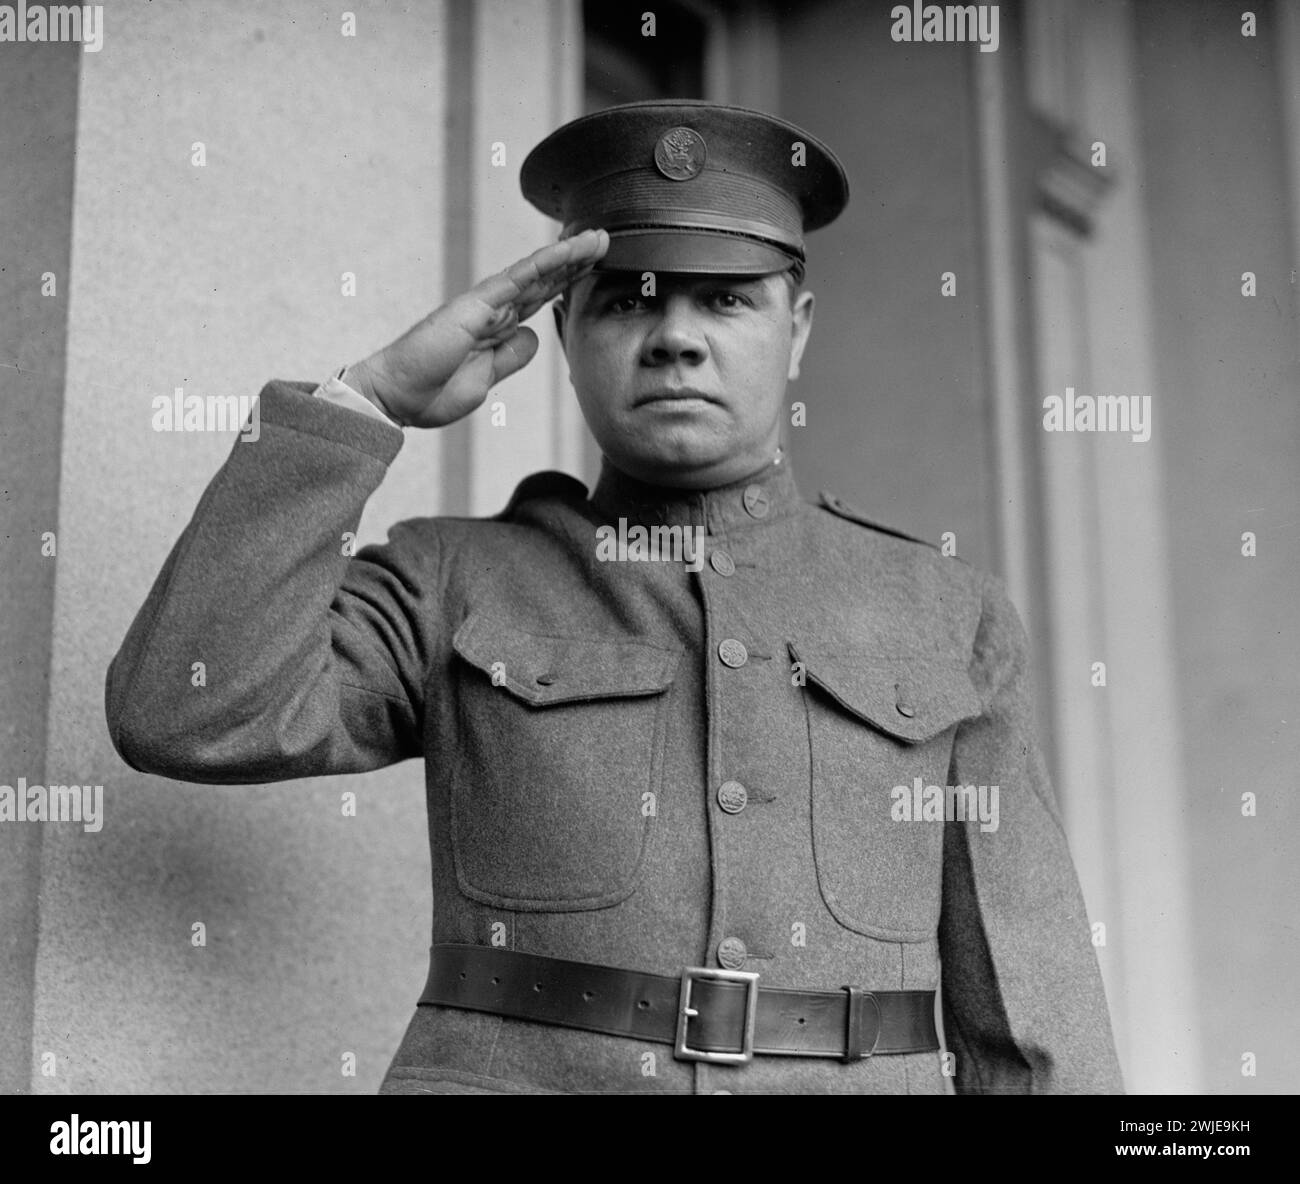 Baseball icon Babe Ruth in uniform - Private George H. Ruth of 104th Field Artillery N.Y. National Guard, 1924 Stock Photo